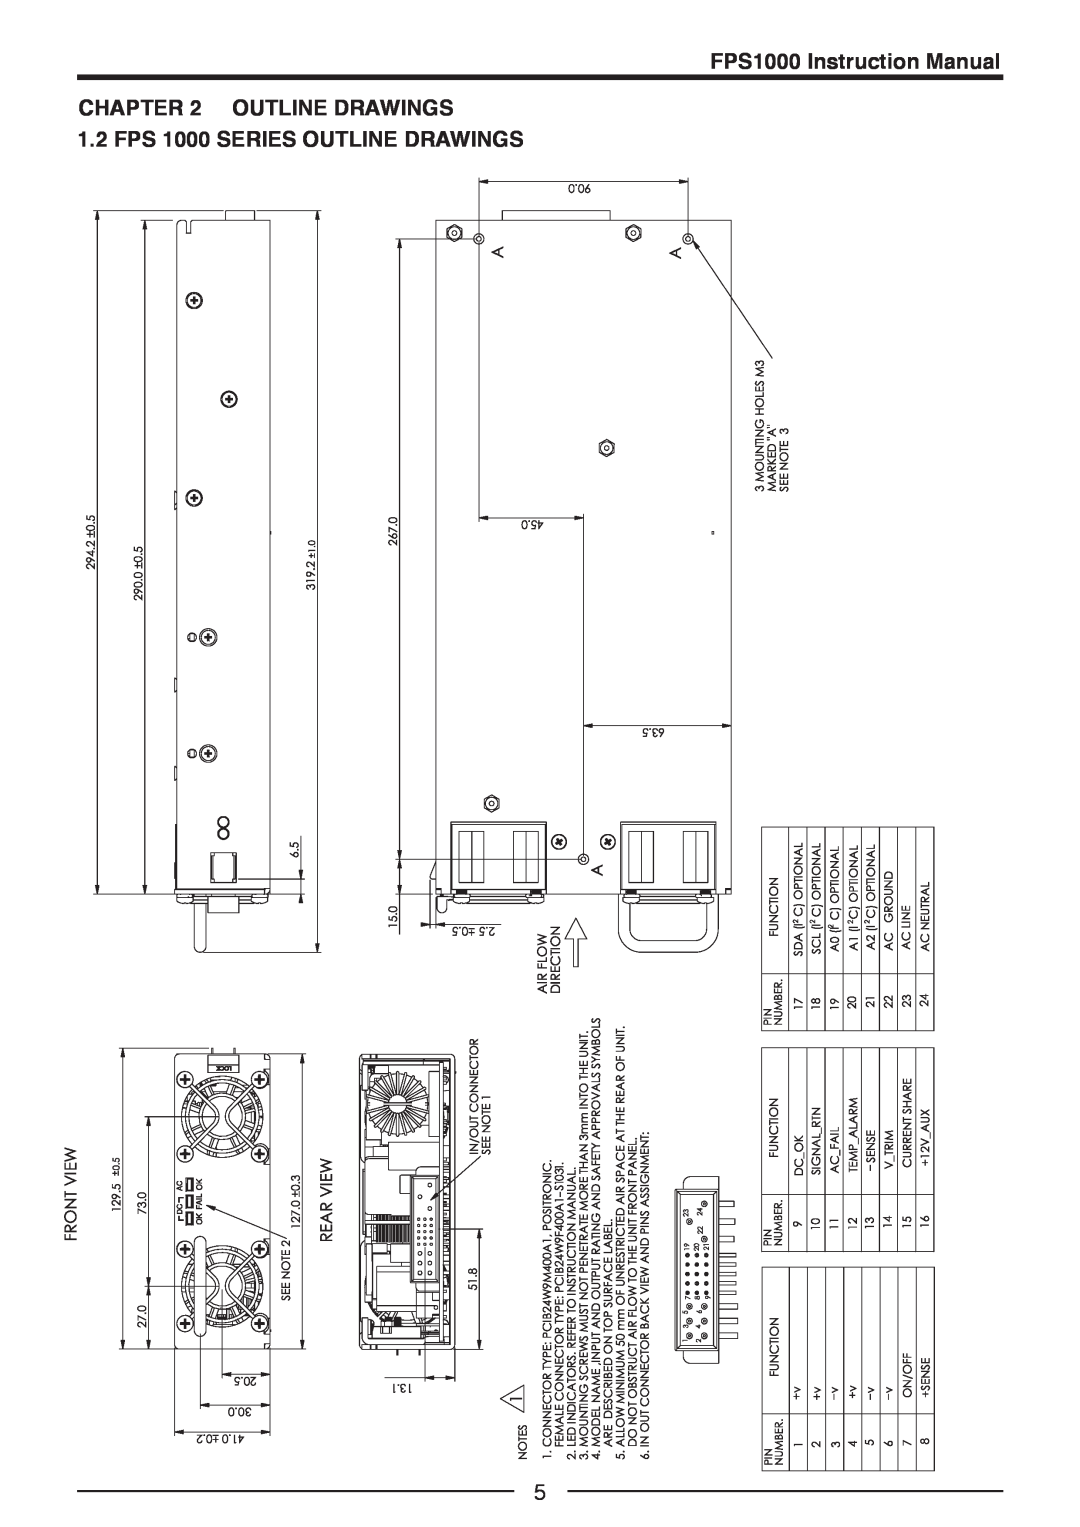 TOA Electronics FPS1000-32, FPS1000-24 FPS1000 Instruction Manual OUTLINE DRAWINGS, FPS 1000 SERIES OUTLINE DRAWINGS 